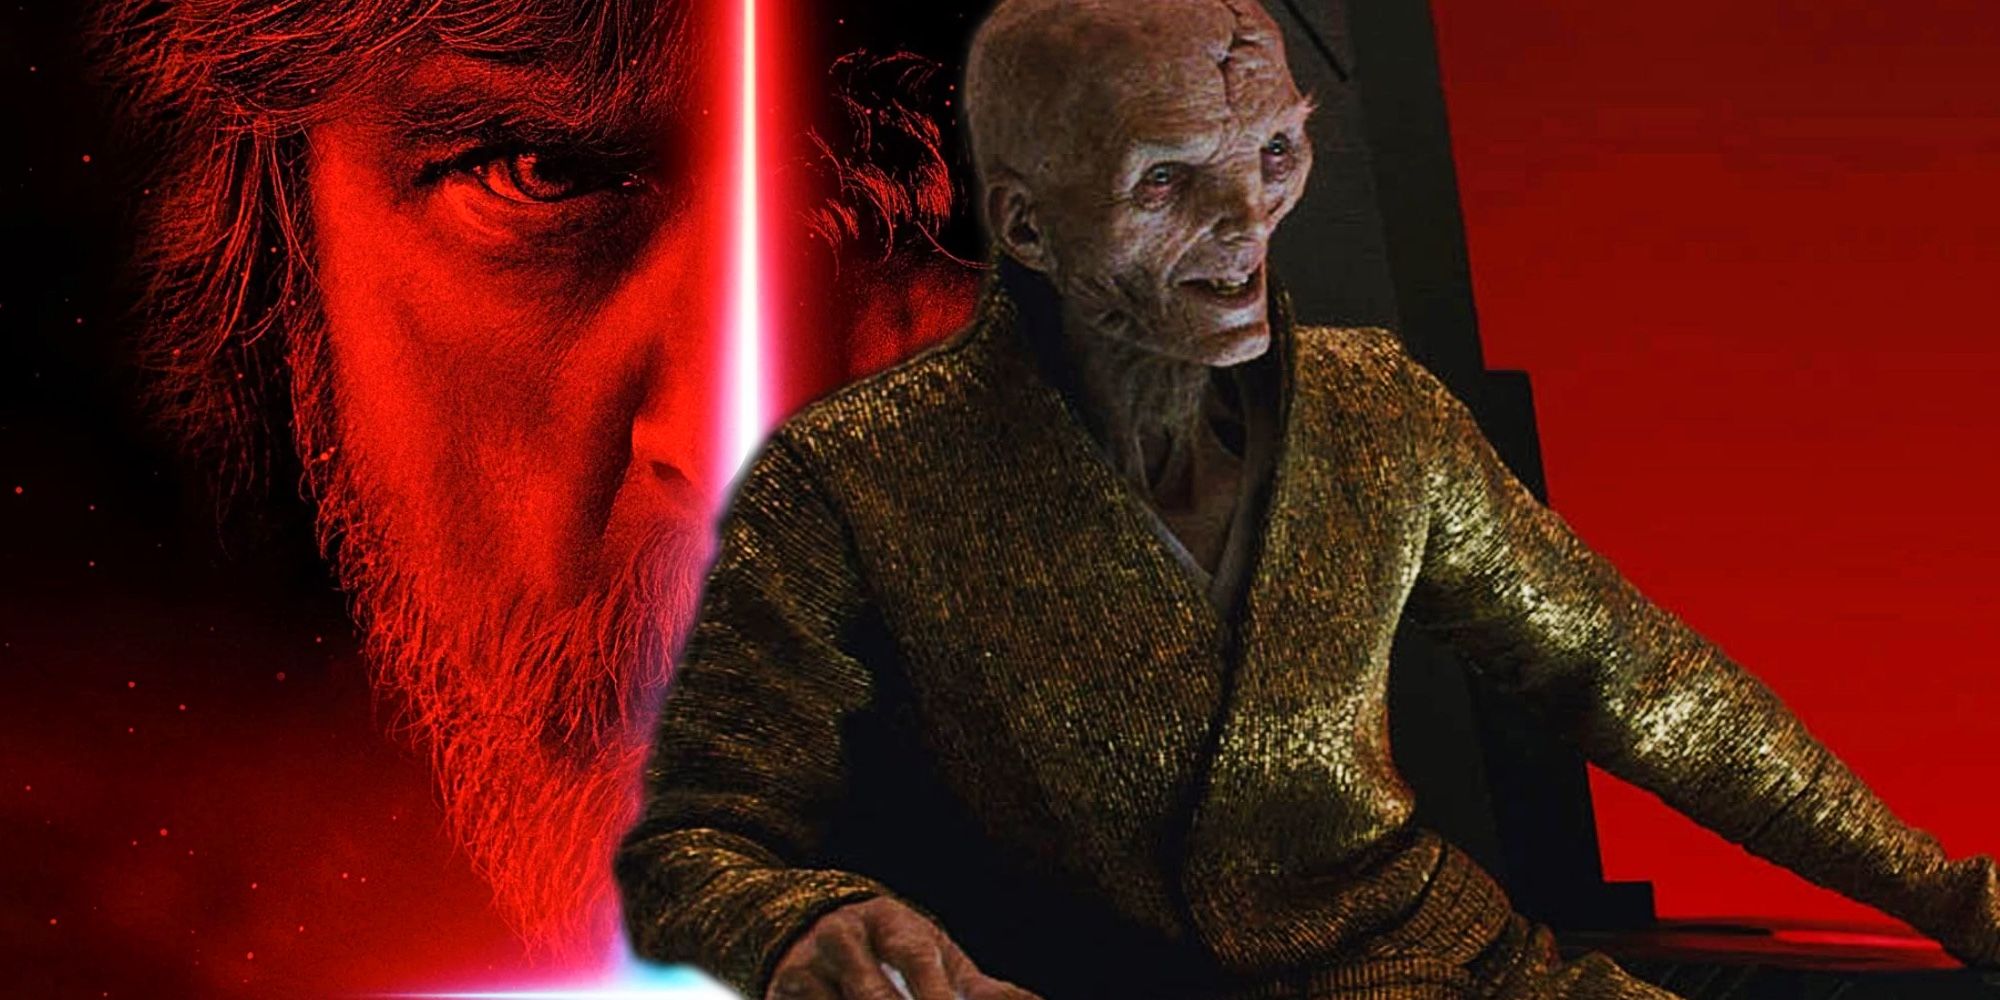 star wars fully explains the last jedi's hyperspace tracking